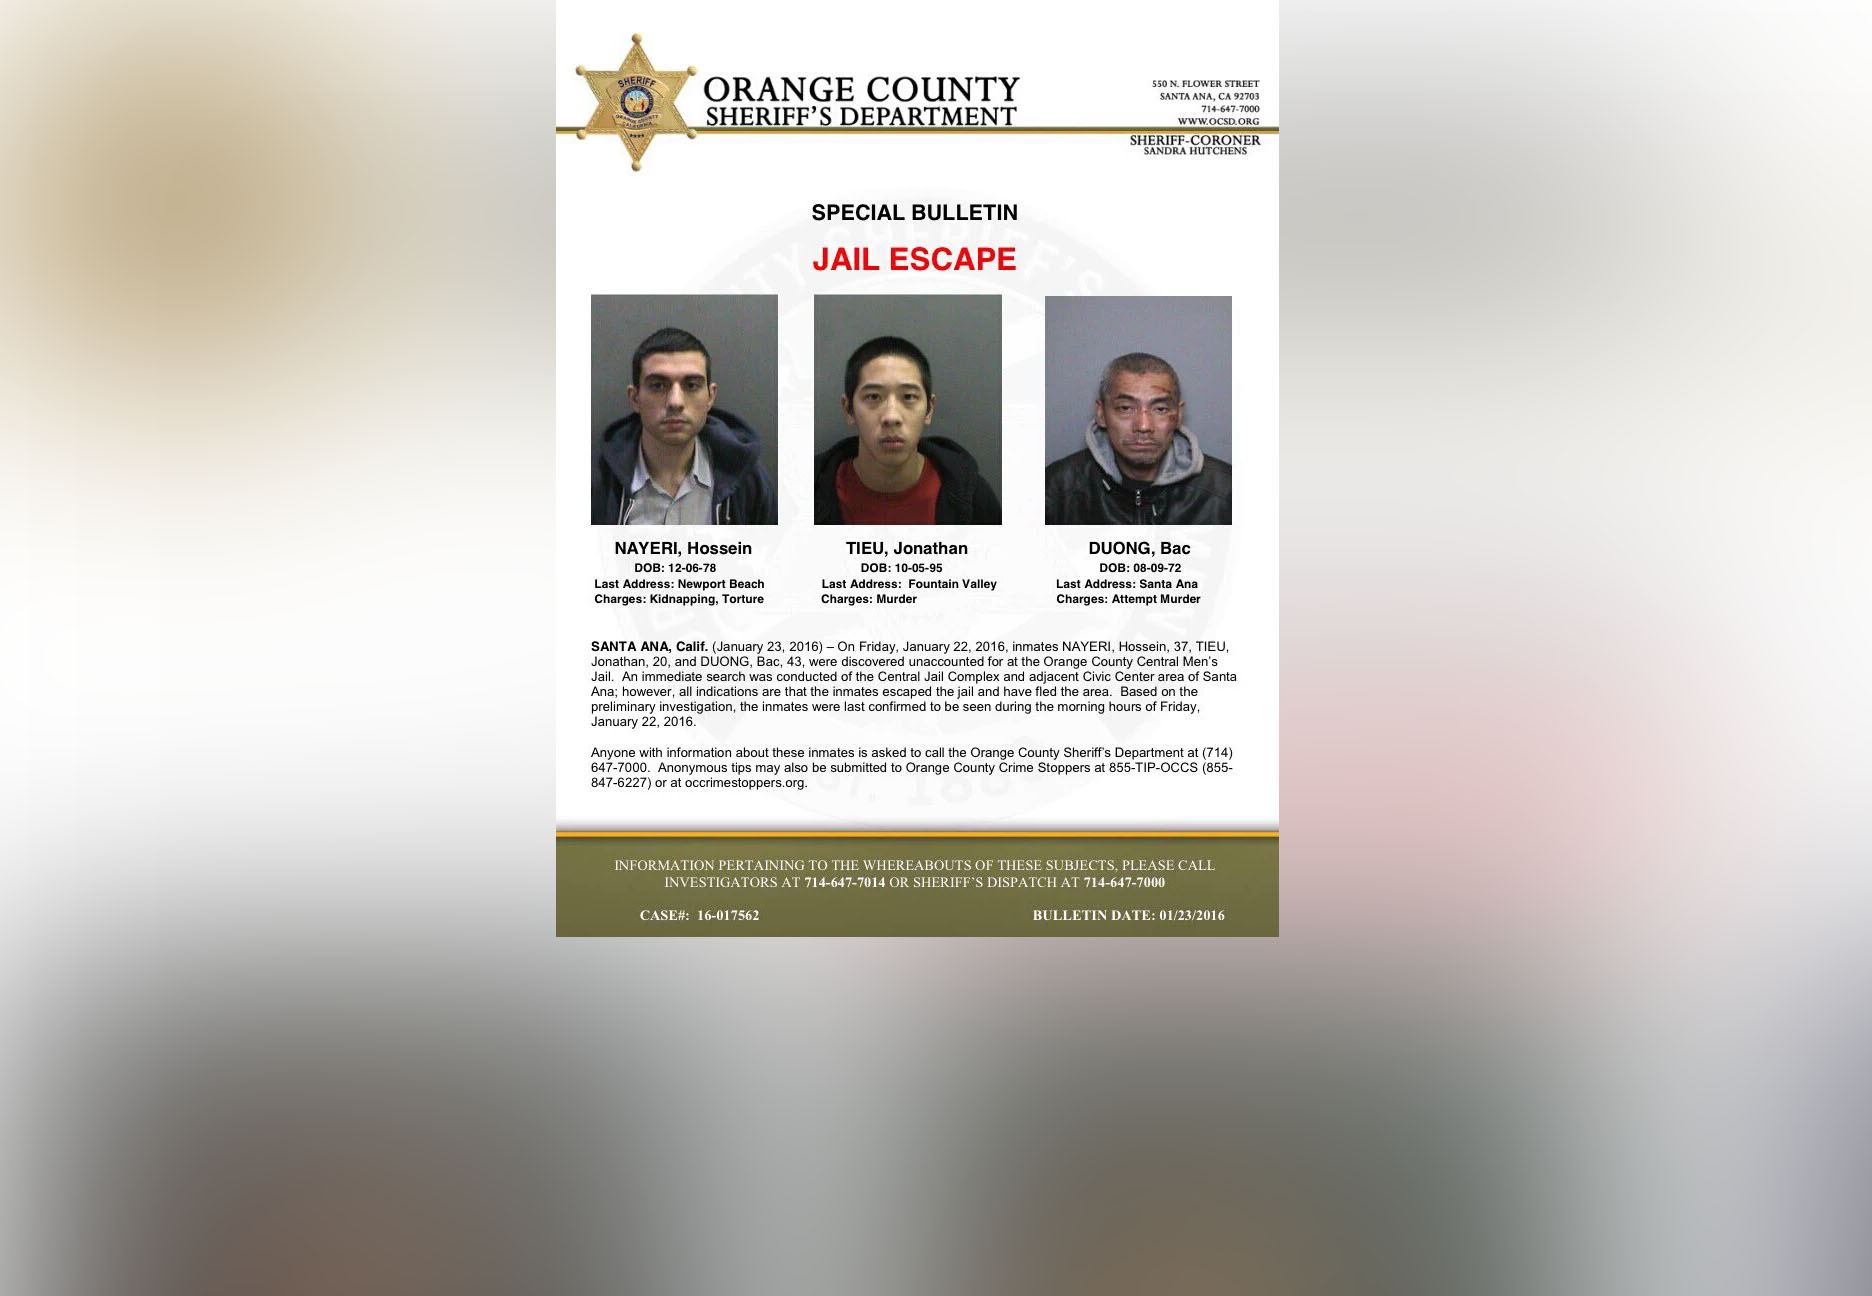 PHOTO: Authorities released this flyer seeking the public's help in apprehending three inmates who allegedly escaped from a Southern California jail.